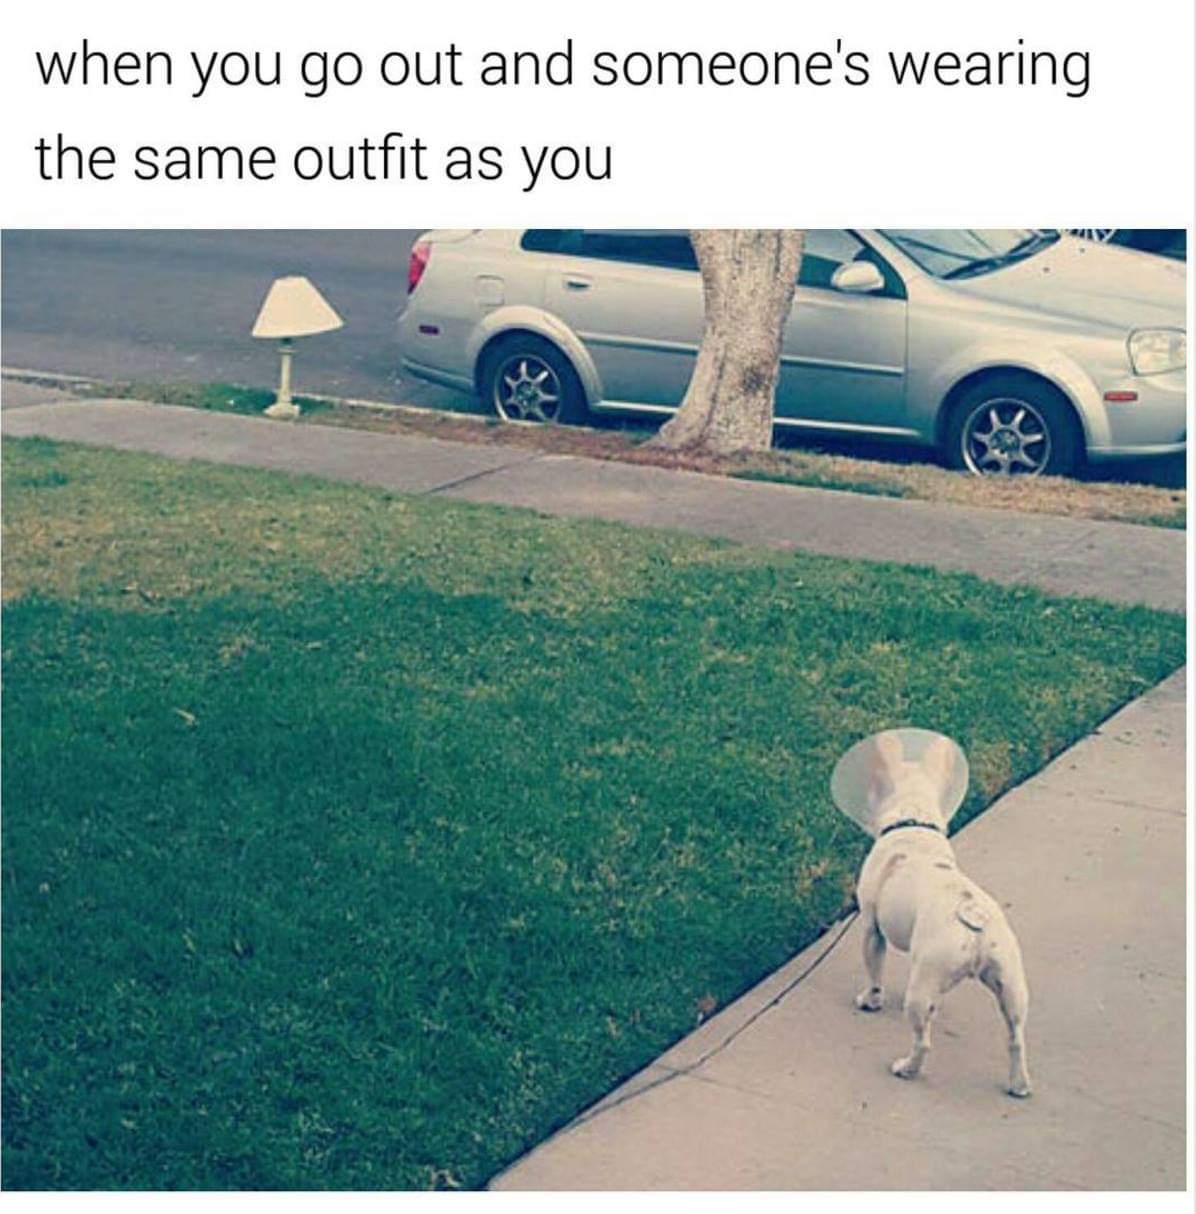 love at first sight dog - when you go out and someone's wearing the same outfit as you